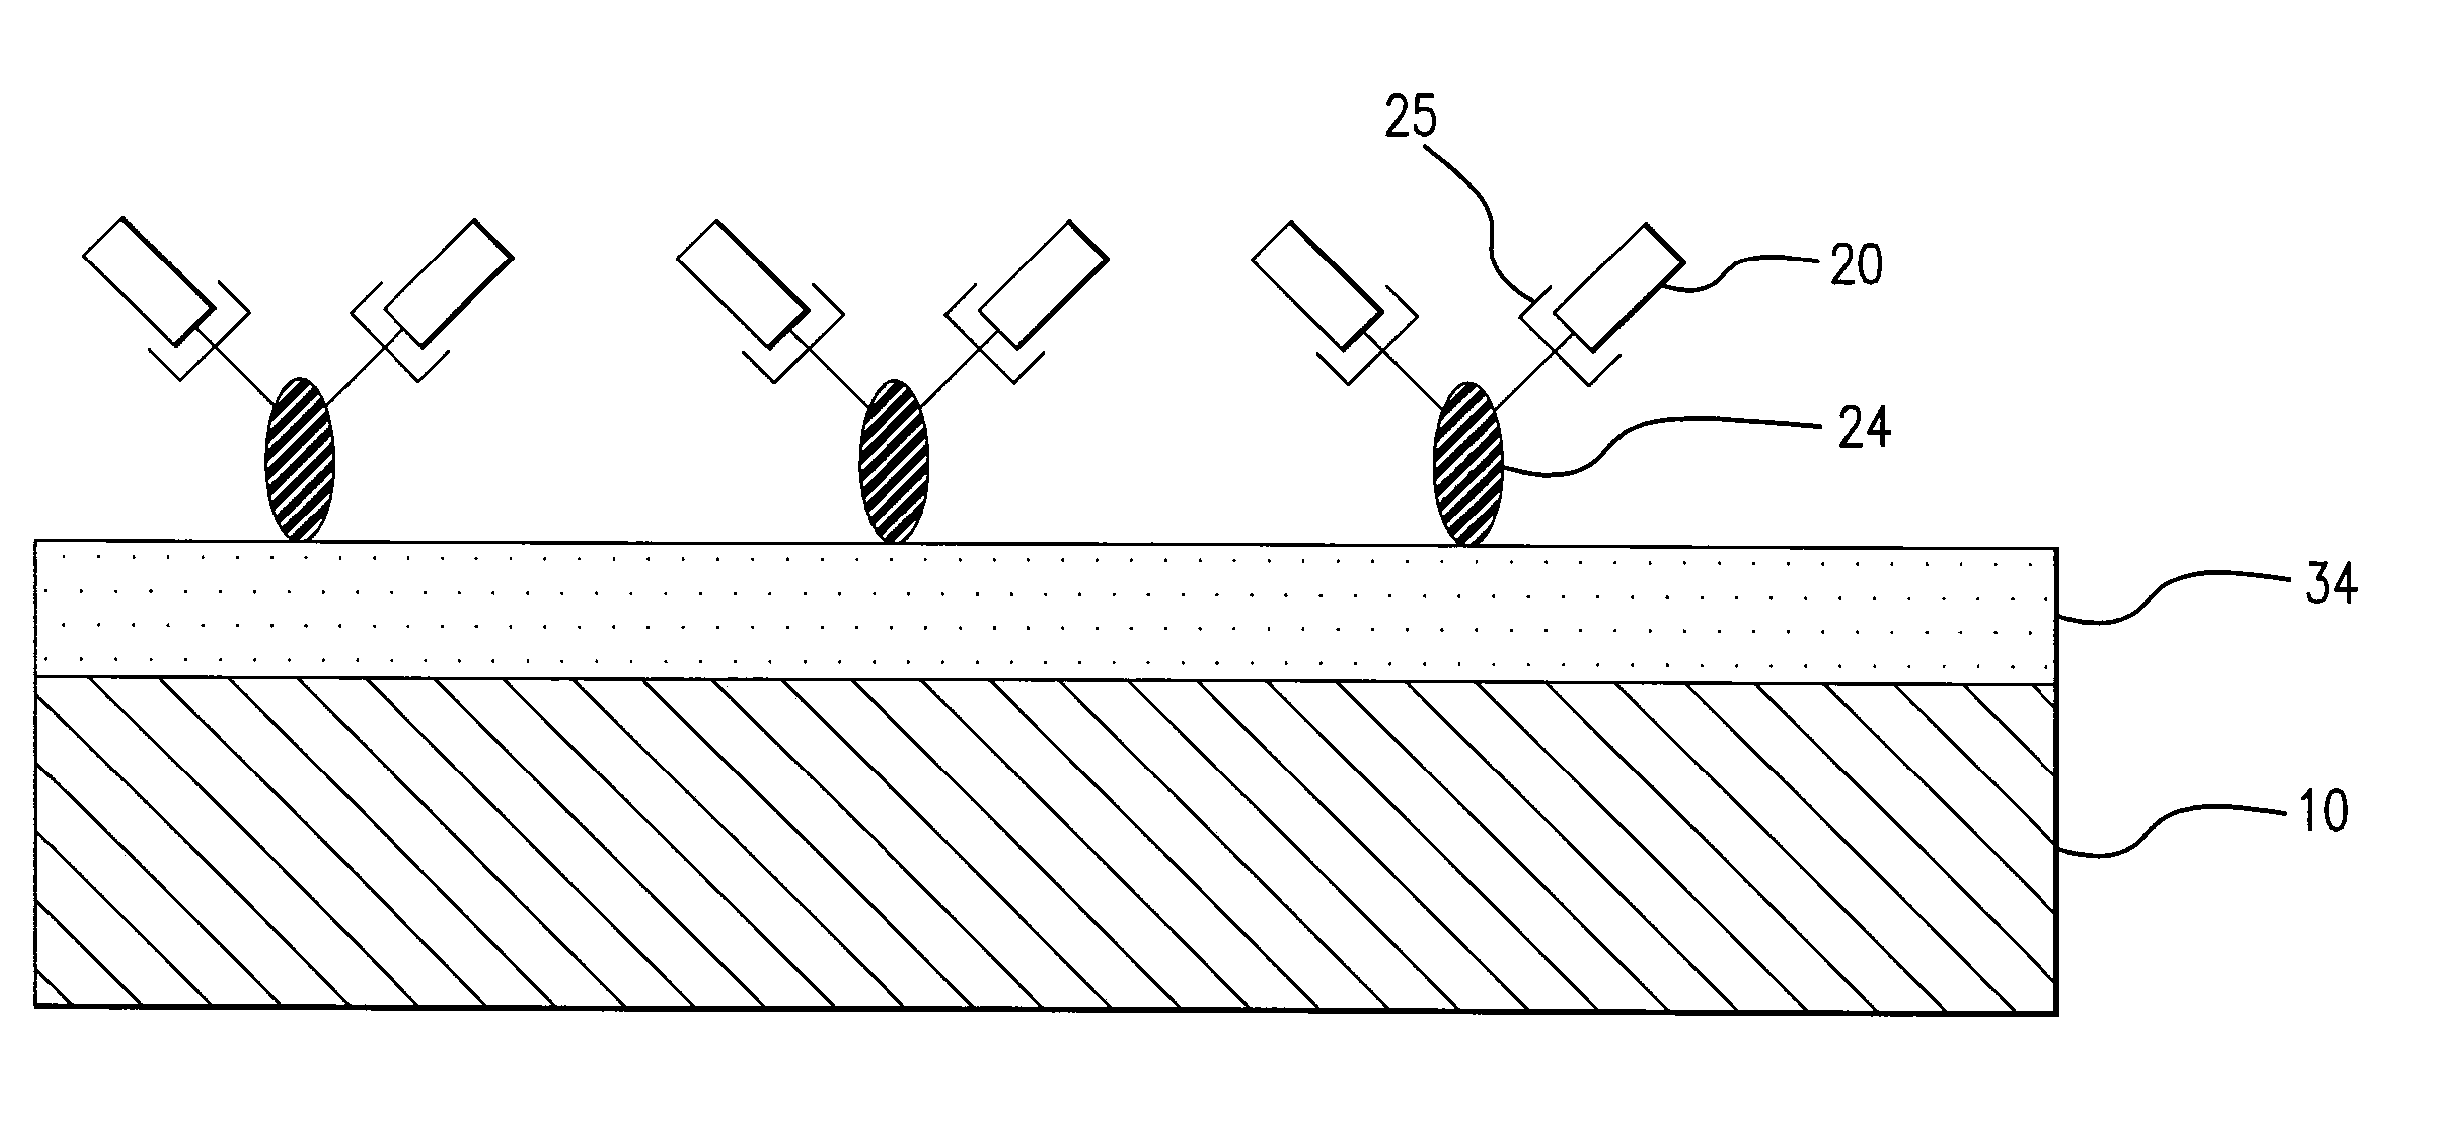 Medical devices having a coating for promoting endothelial cell adhesion